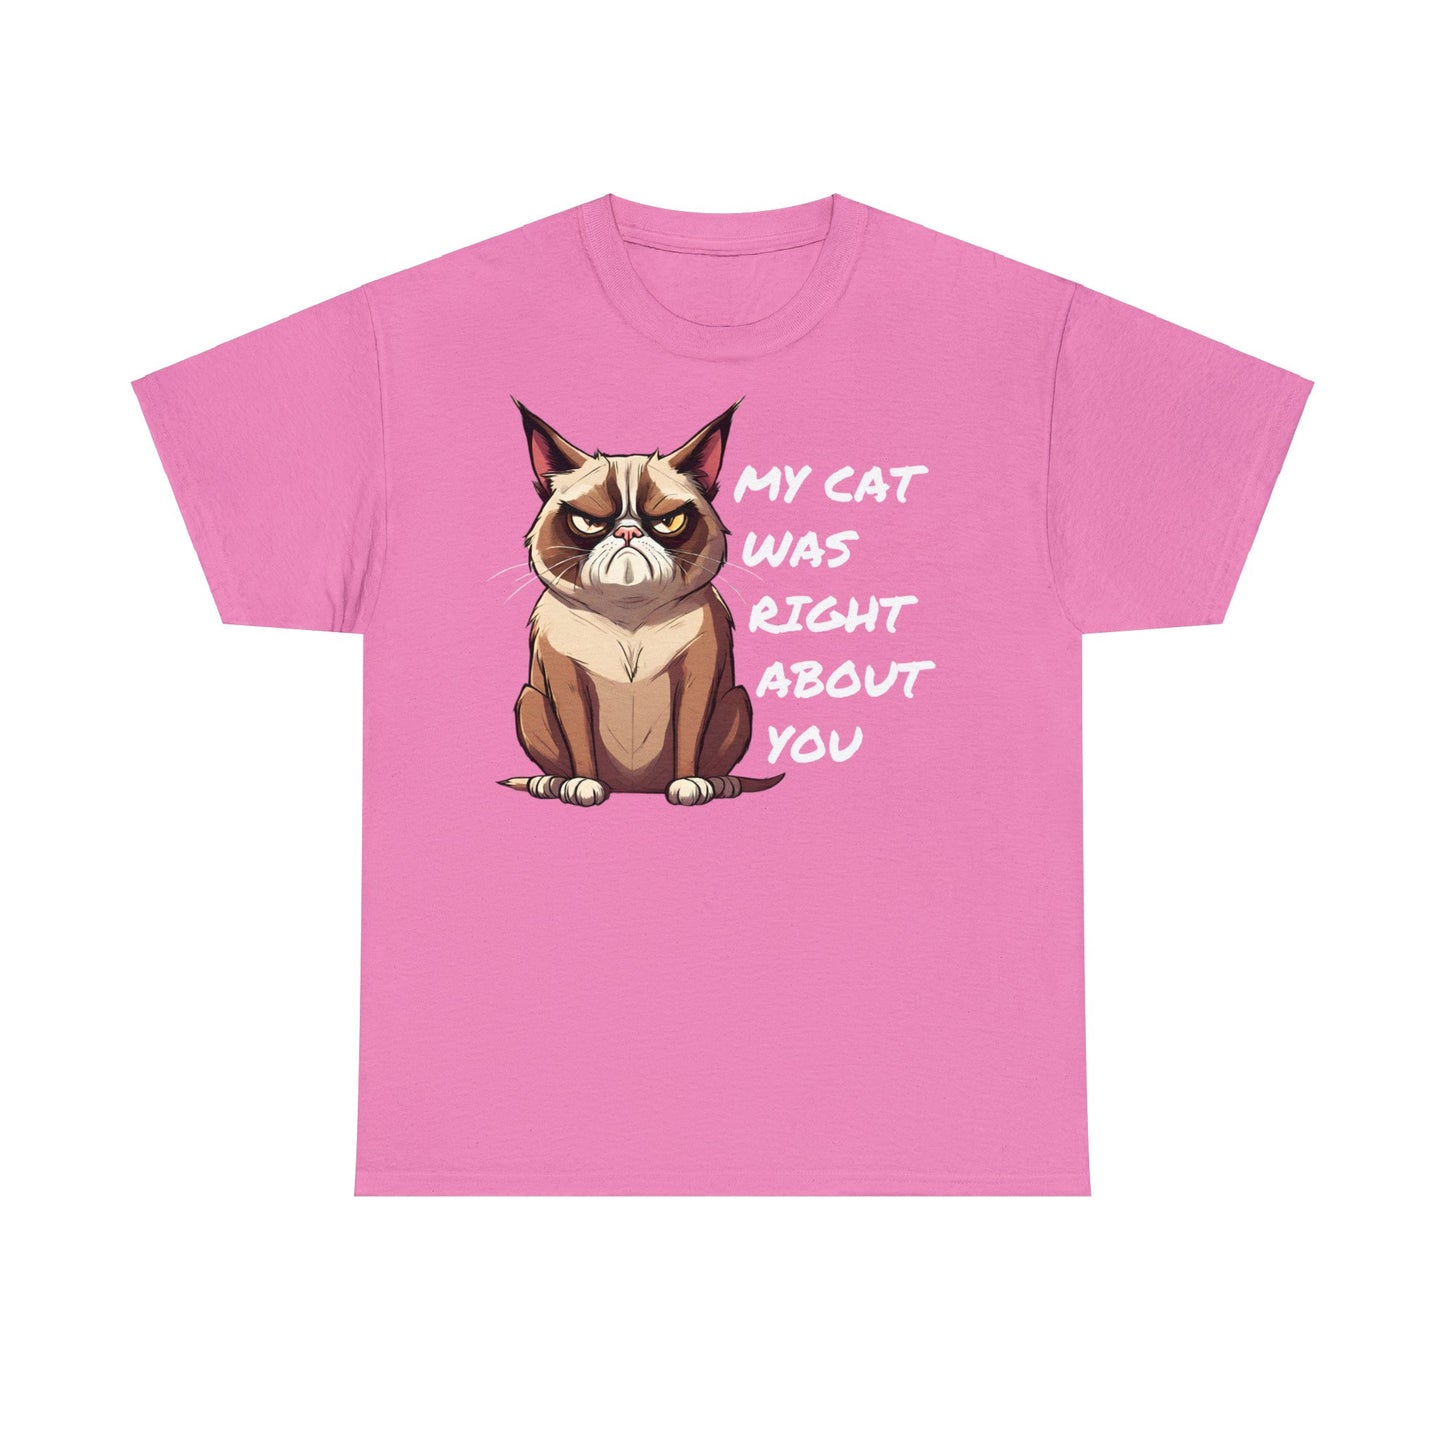 My Cat Was Right About You T Shirt